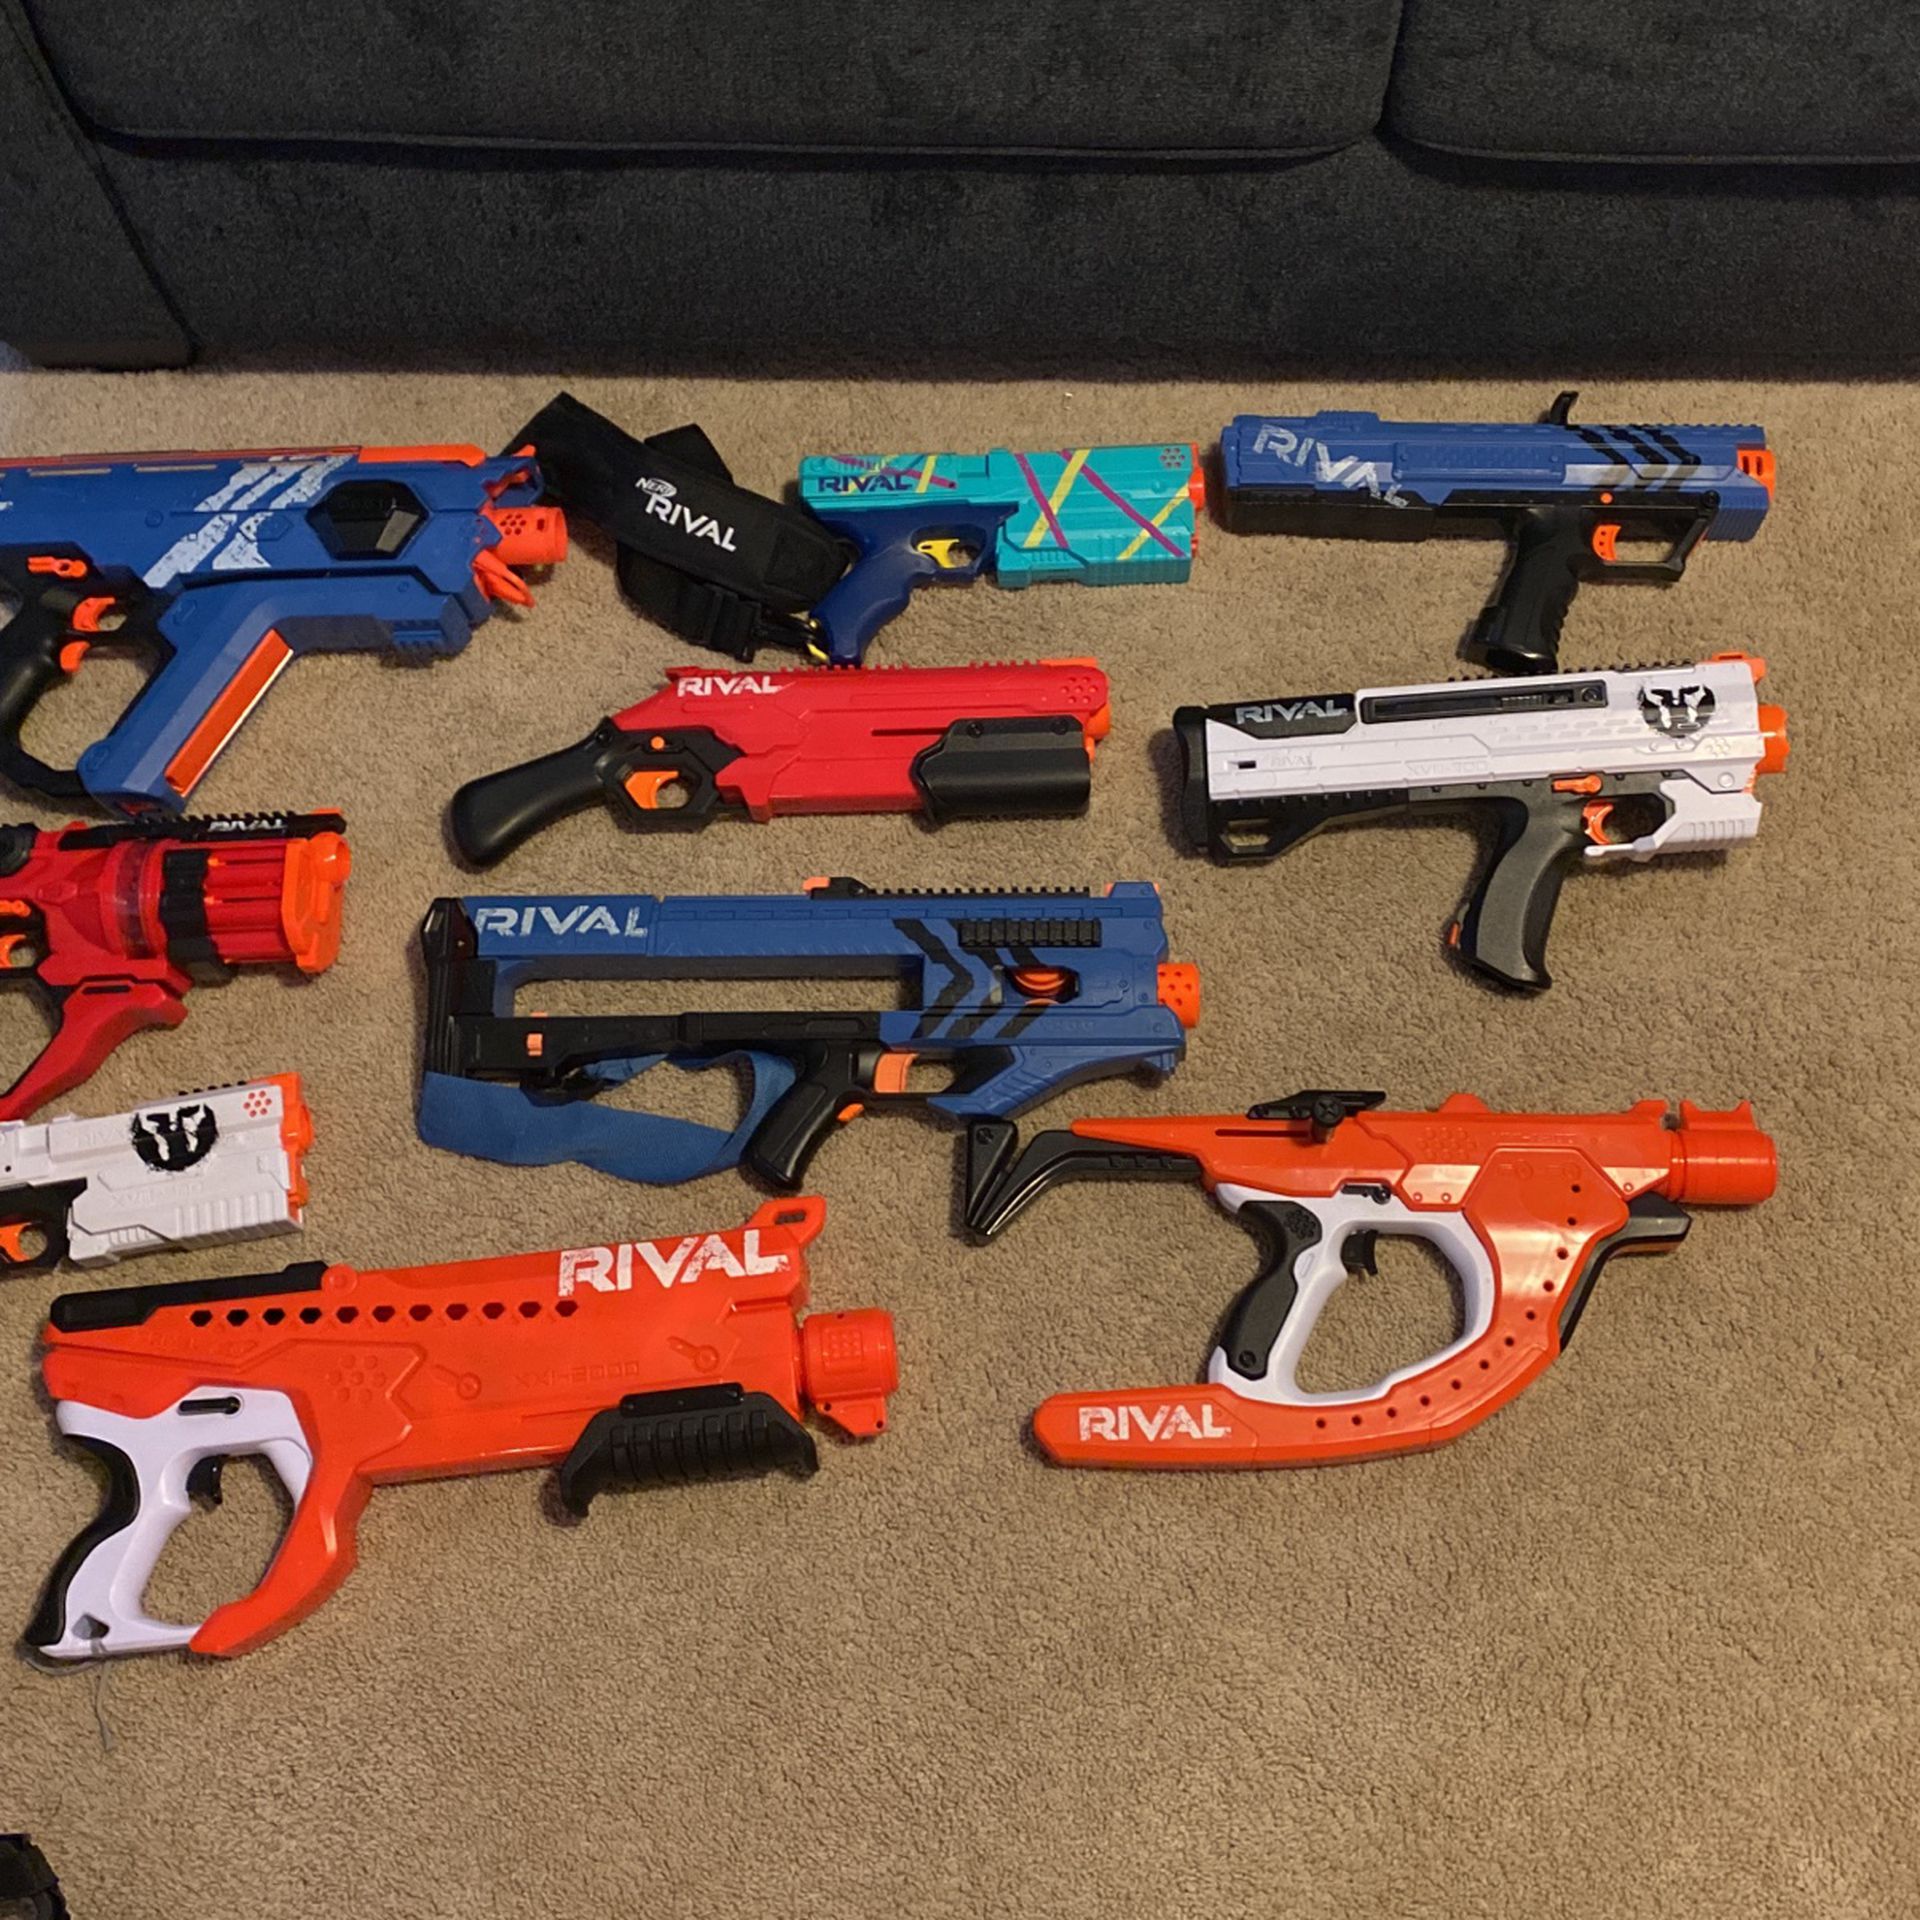 Rival Nerf gun collection